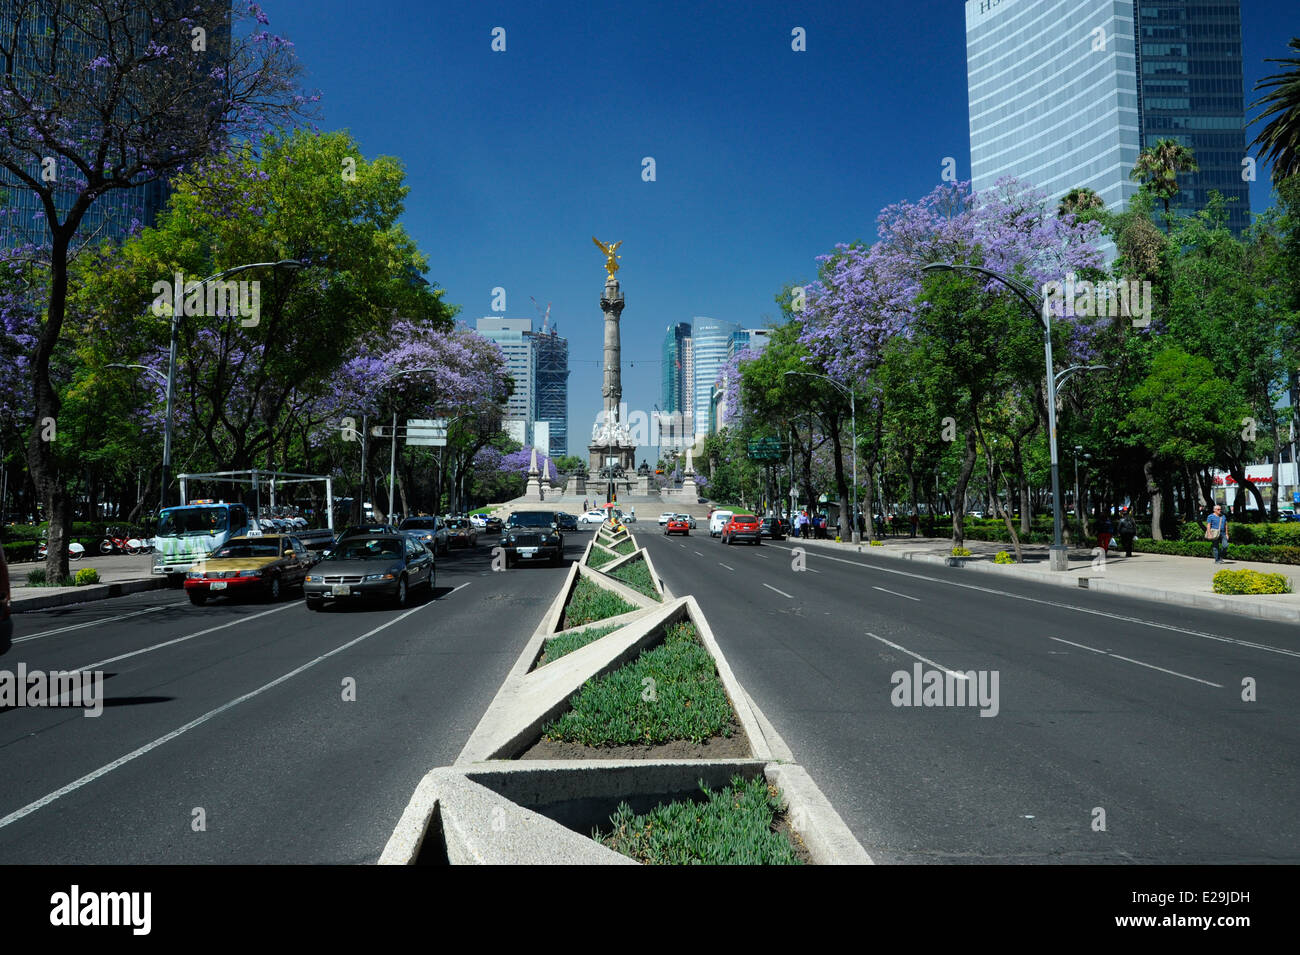 Traffic and pedestrians on the Paseo de la Reforma street in downtown, Mexico City, Mexico Stock Photo